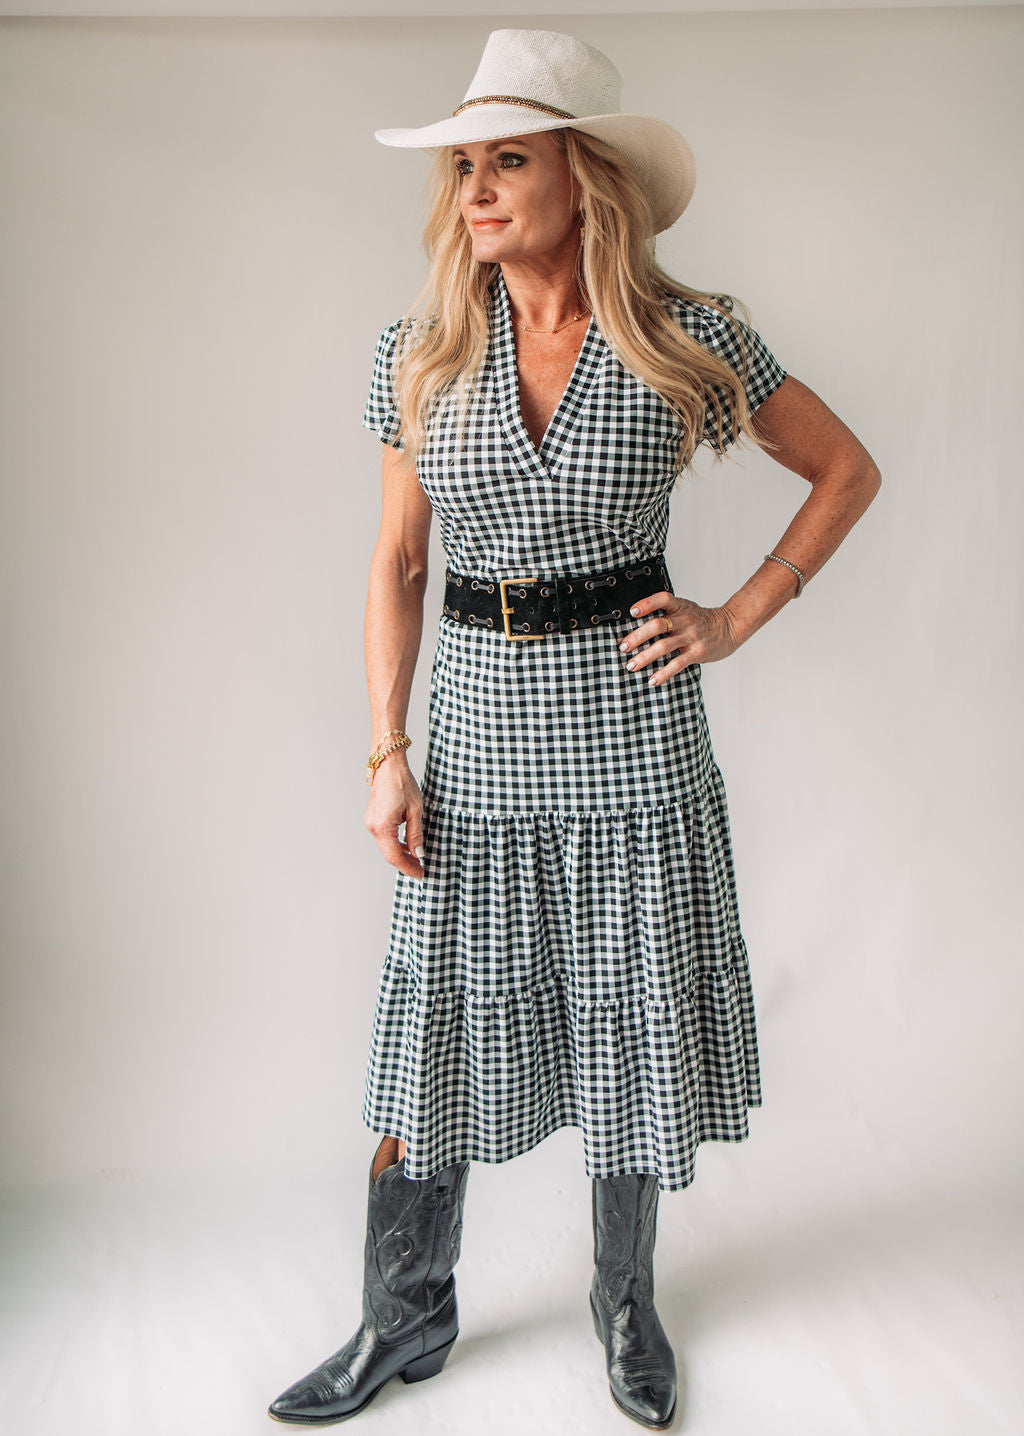 LIBBY DRESS IN BLACK AND WHITE GINGHAM PRINT